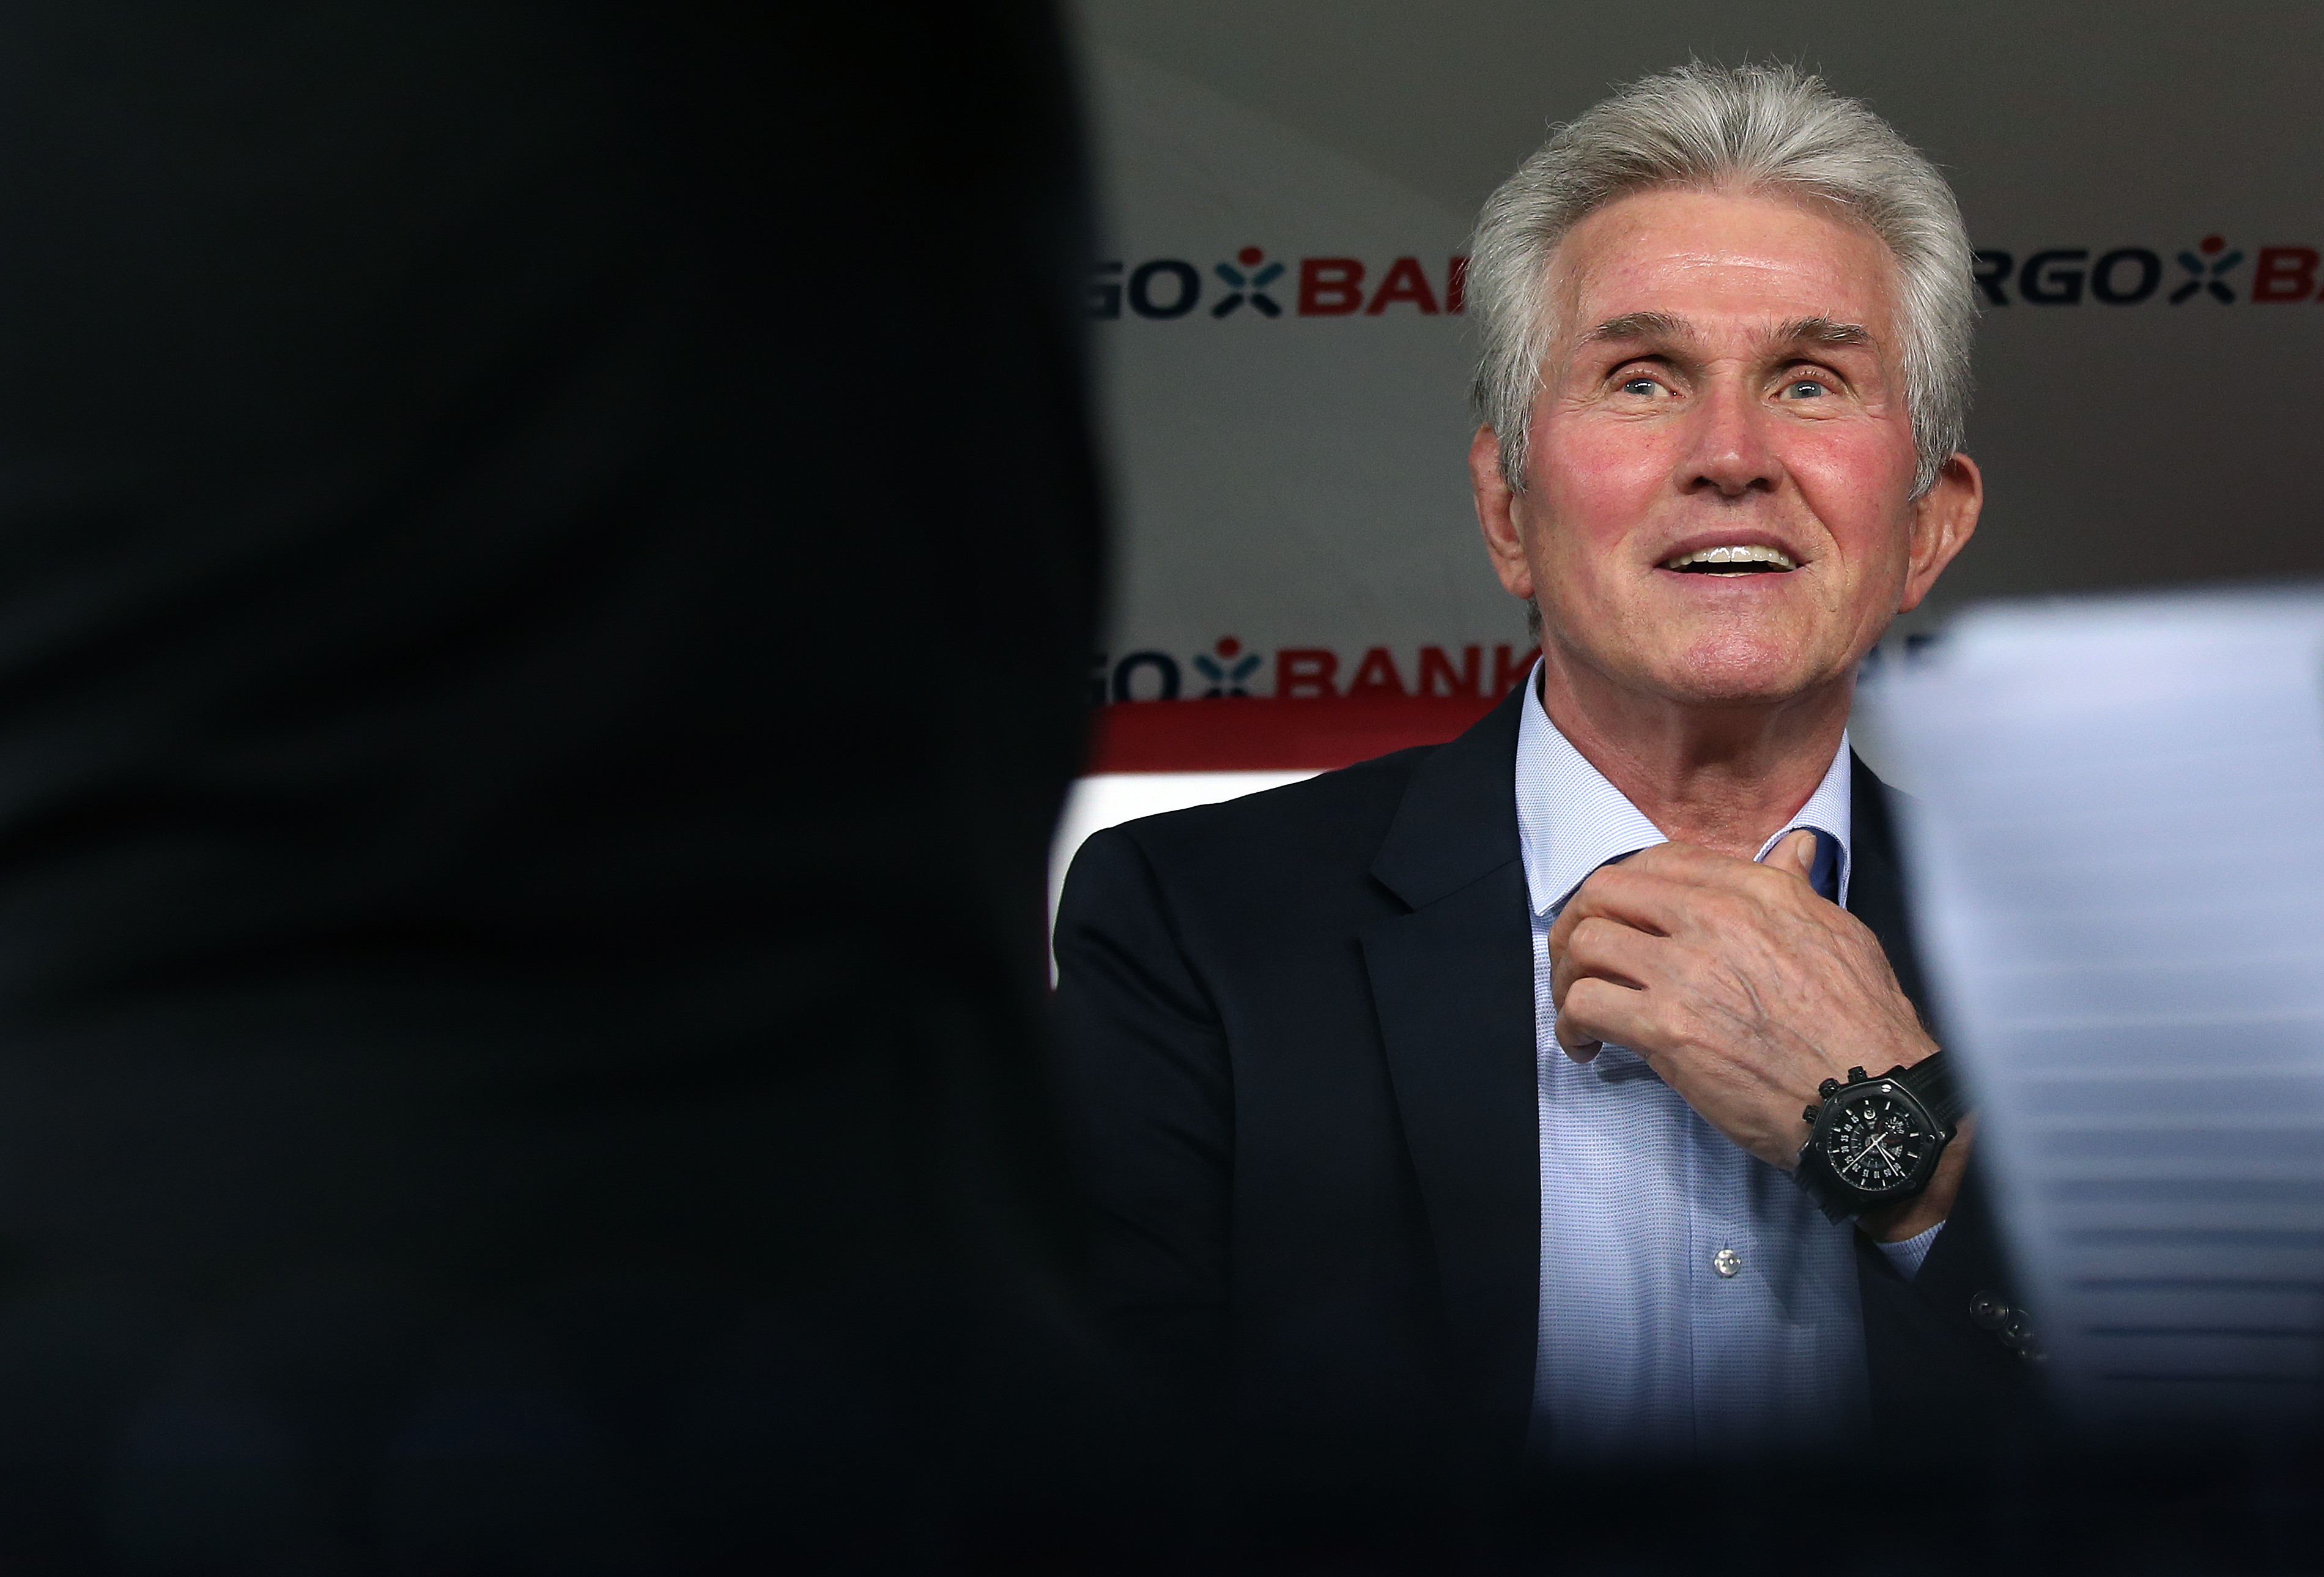 LEIPZIG, GERMANY - OCTOBER 25: Head coach Jupp Heynckes of Muenchen smiles prior to the DFB Cup round 2 match between RB Leipzig and Bayern Muenchen at Red Bull Arena on October 25, 2017 in Leipzig, Germany. (Photo by Ronny Hartmann/Bongarts/Getty Images)